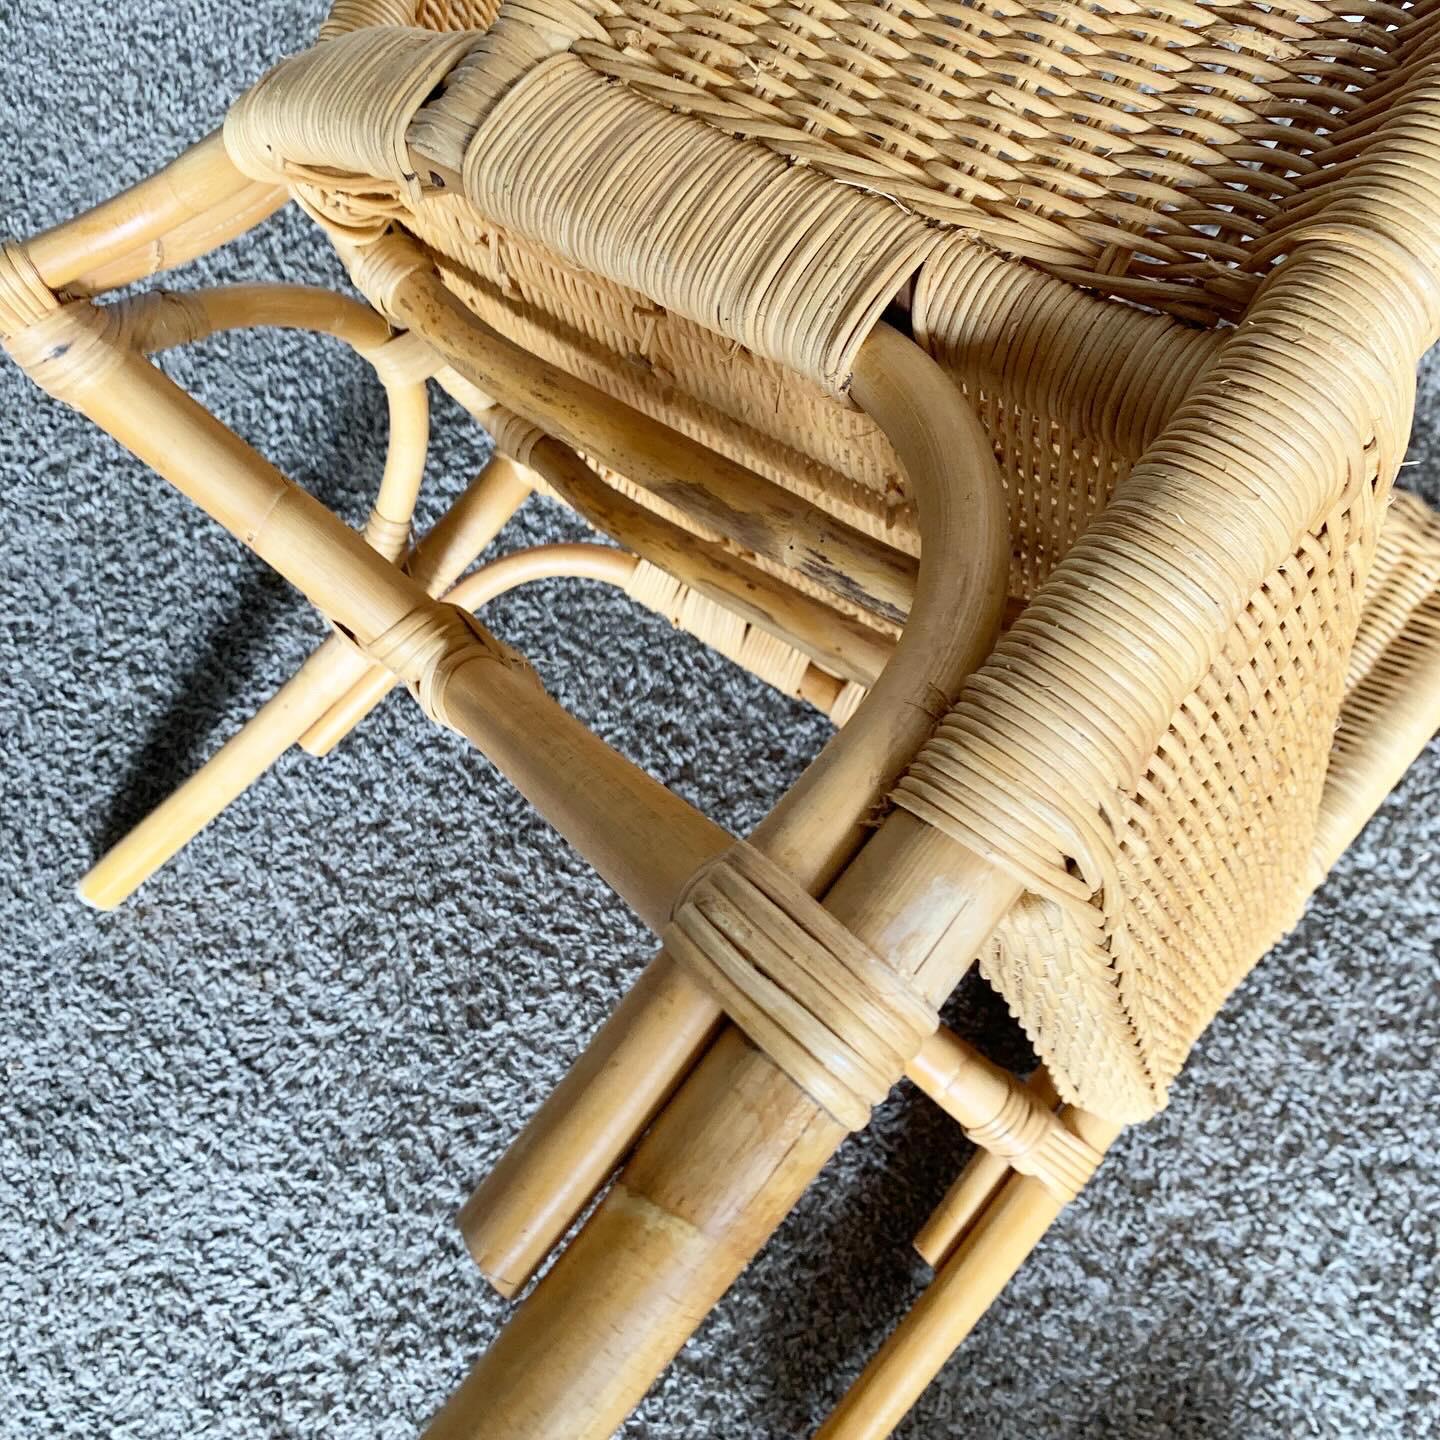 Embrace casual elegance with Wicker Rattan Dining Arm Chairs, a set of four, bringing natural textures to your dining space for a coastal-inspired experience.
Minor wear to the finish around the edges as seen in photos.